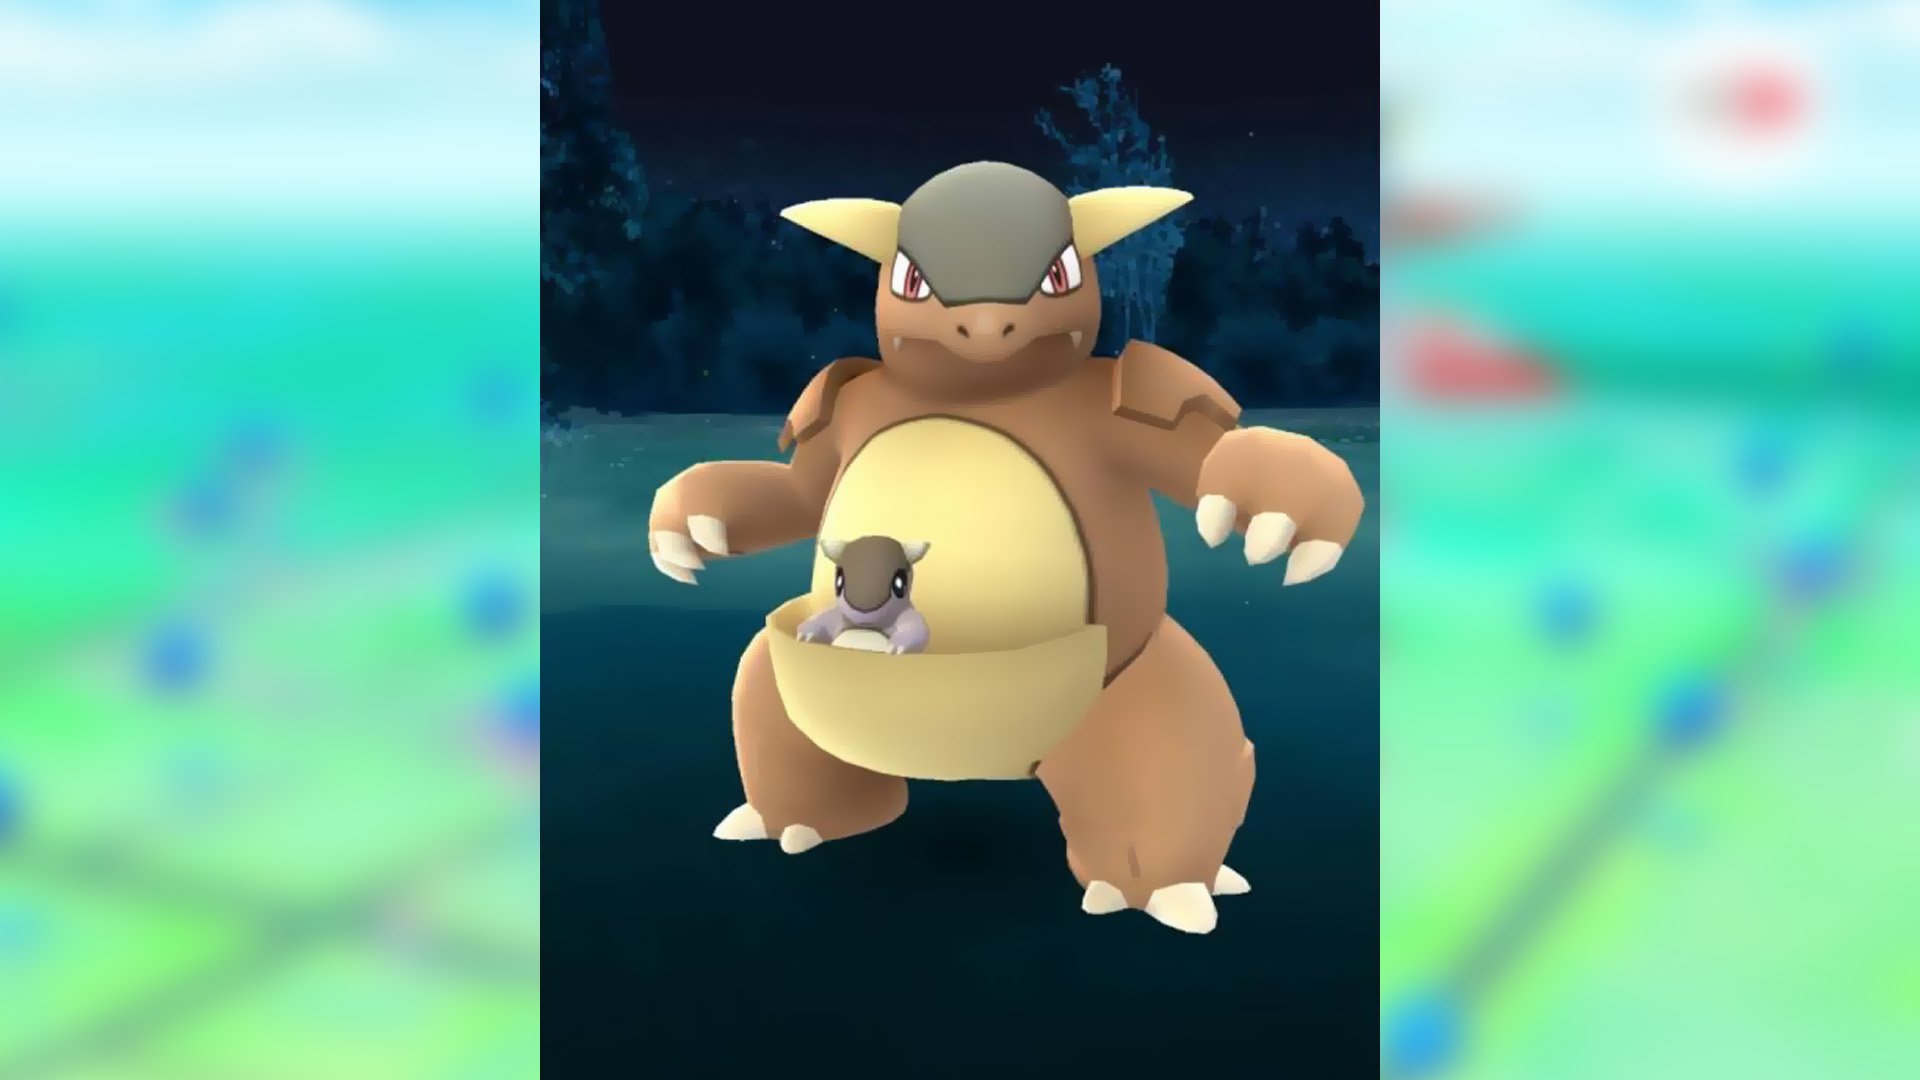 Kangaskhan available in Pokémon GO during World Championship Nintendo Wire